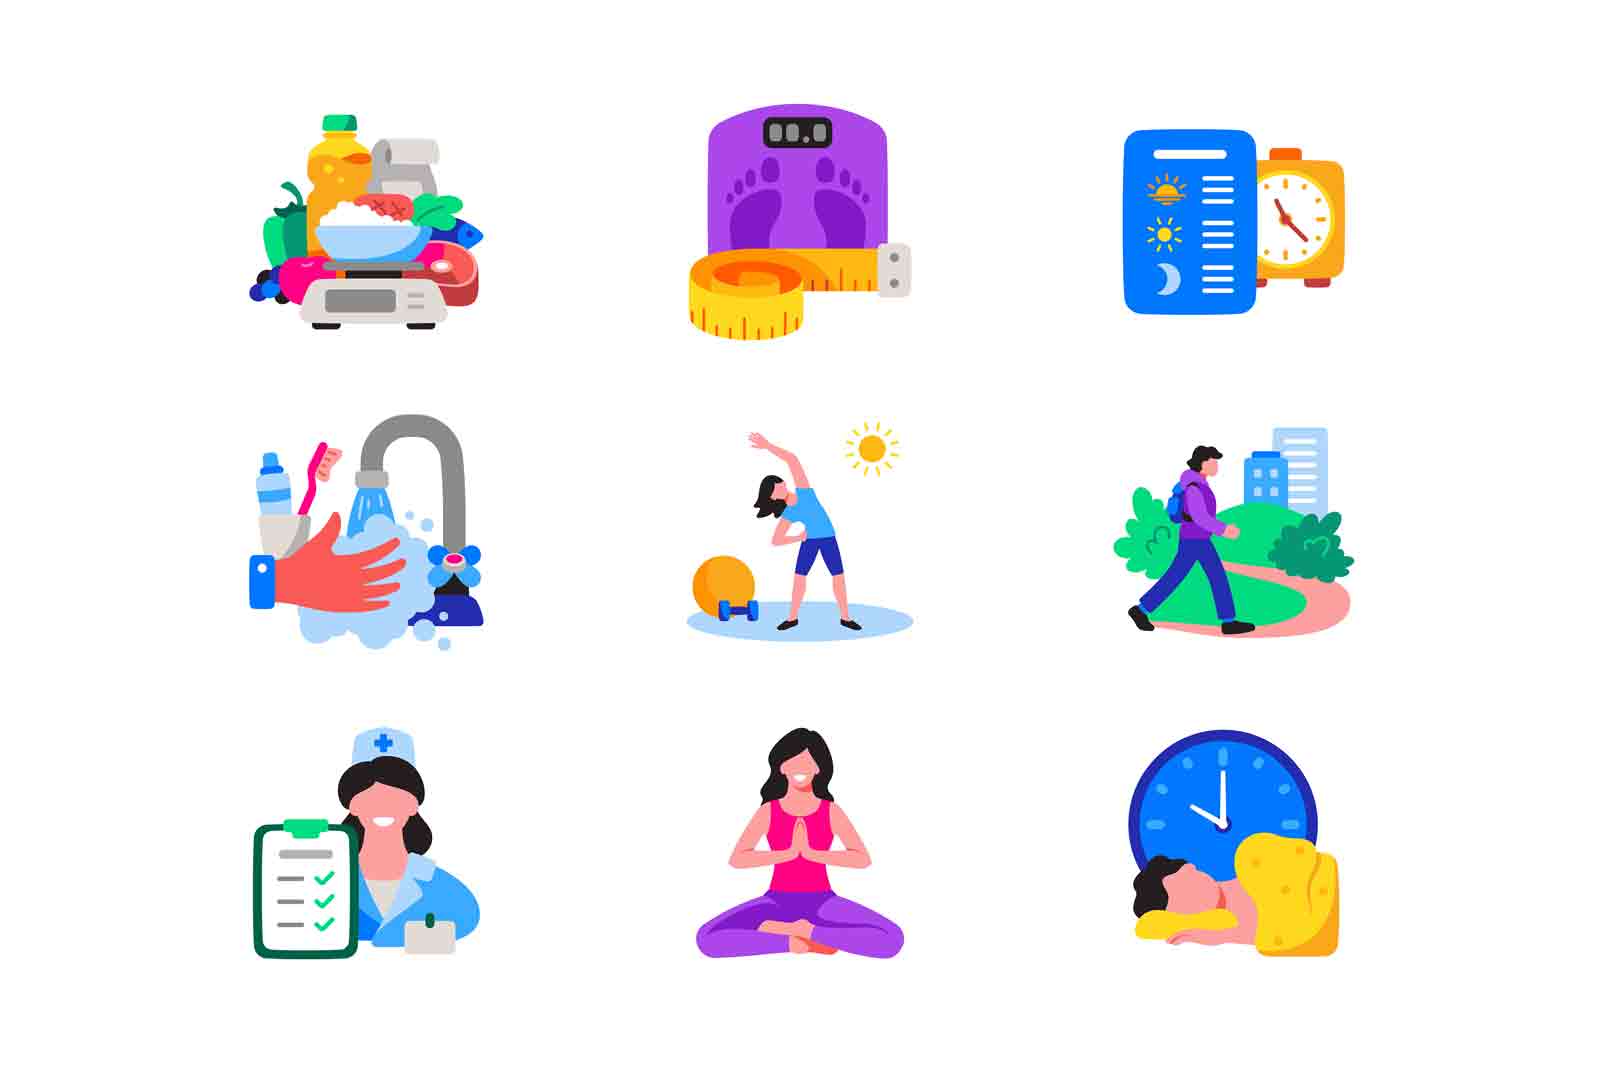 Healthy lifestyle icon set. Important aspects of healthy life, like stop and healthy food.